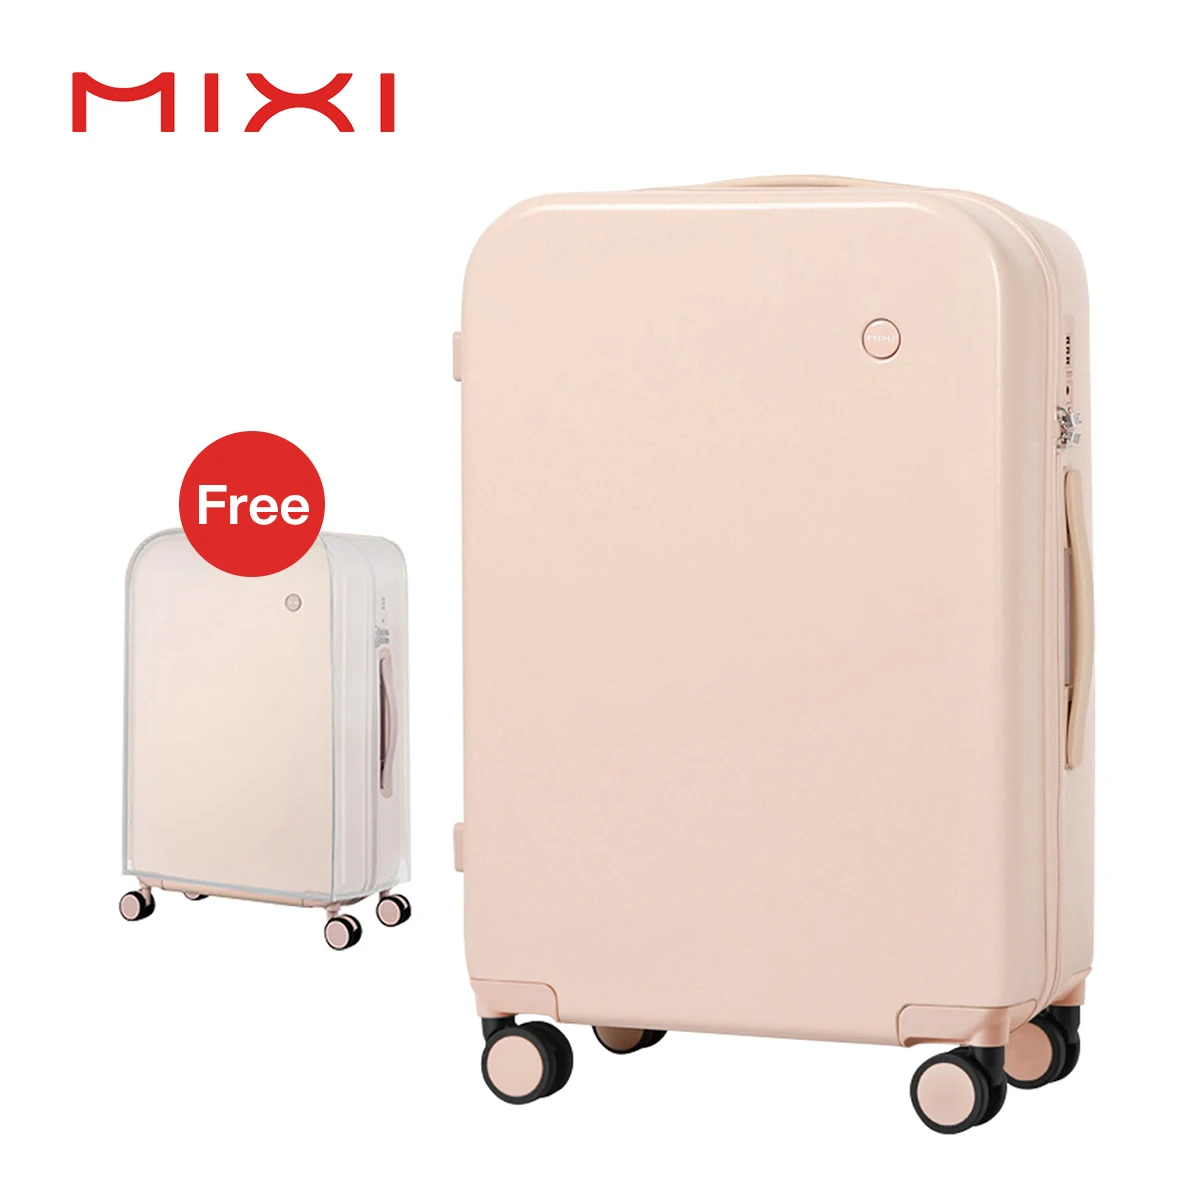 Hanke 16 Inch Business Travel Carry-on Luggage Boarding Laptop Suitcase  Softside Trolley Case Rolling Wheels Password Lock 8016